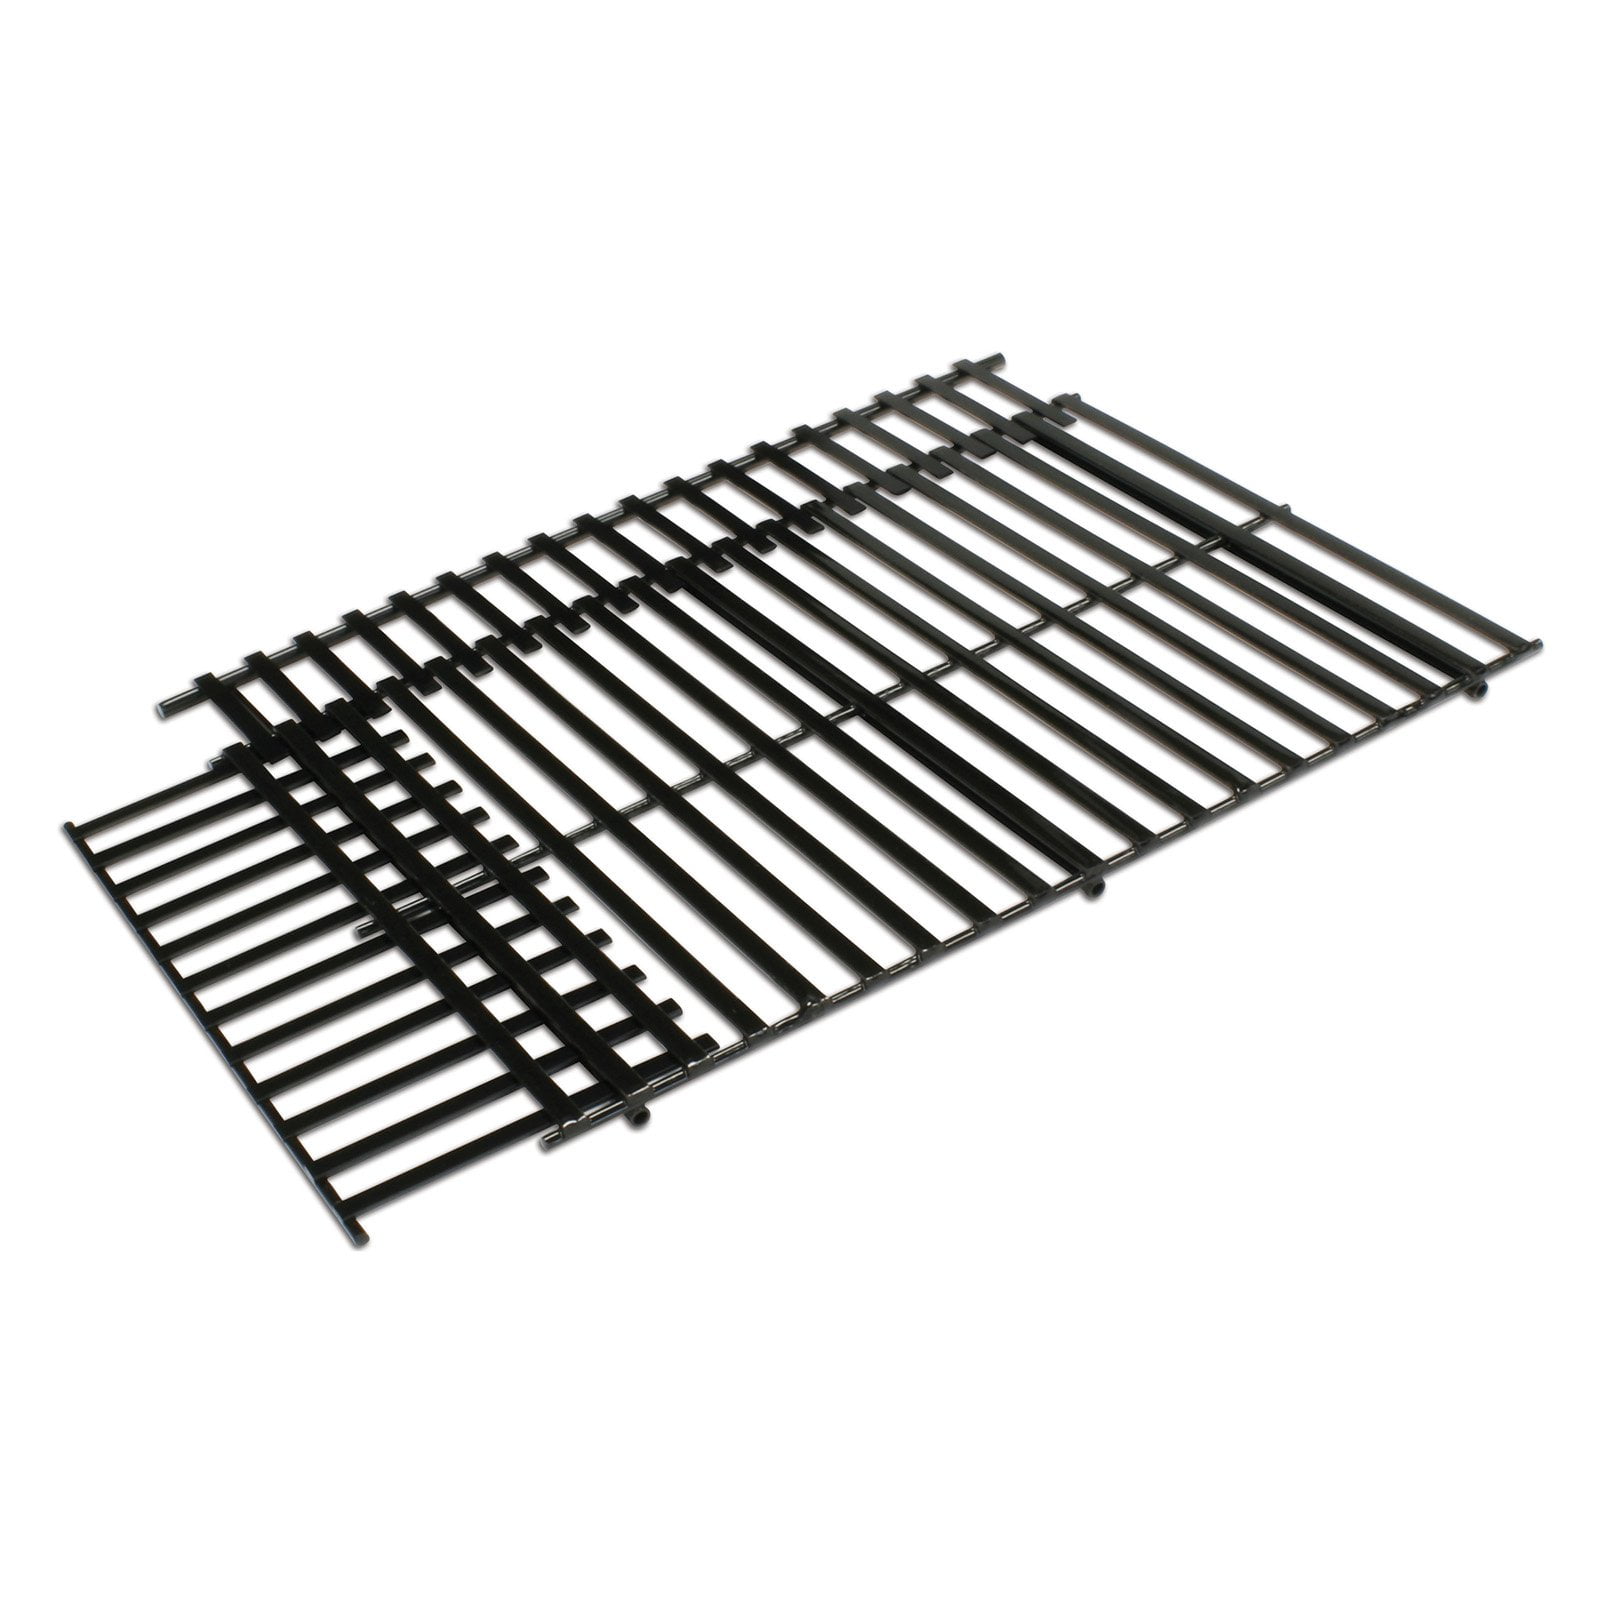 Expert Grill Adjustable Cast Iron Grate Replacement Extends 14 to 20 inches. 